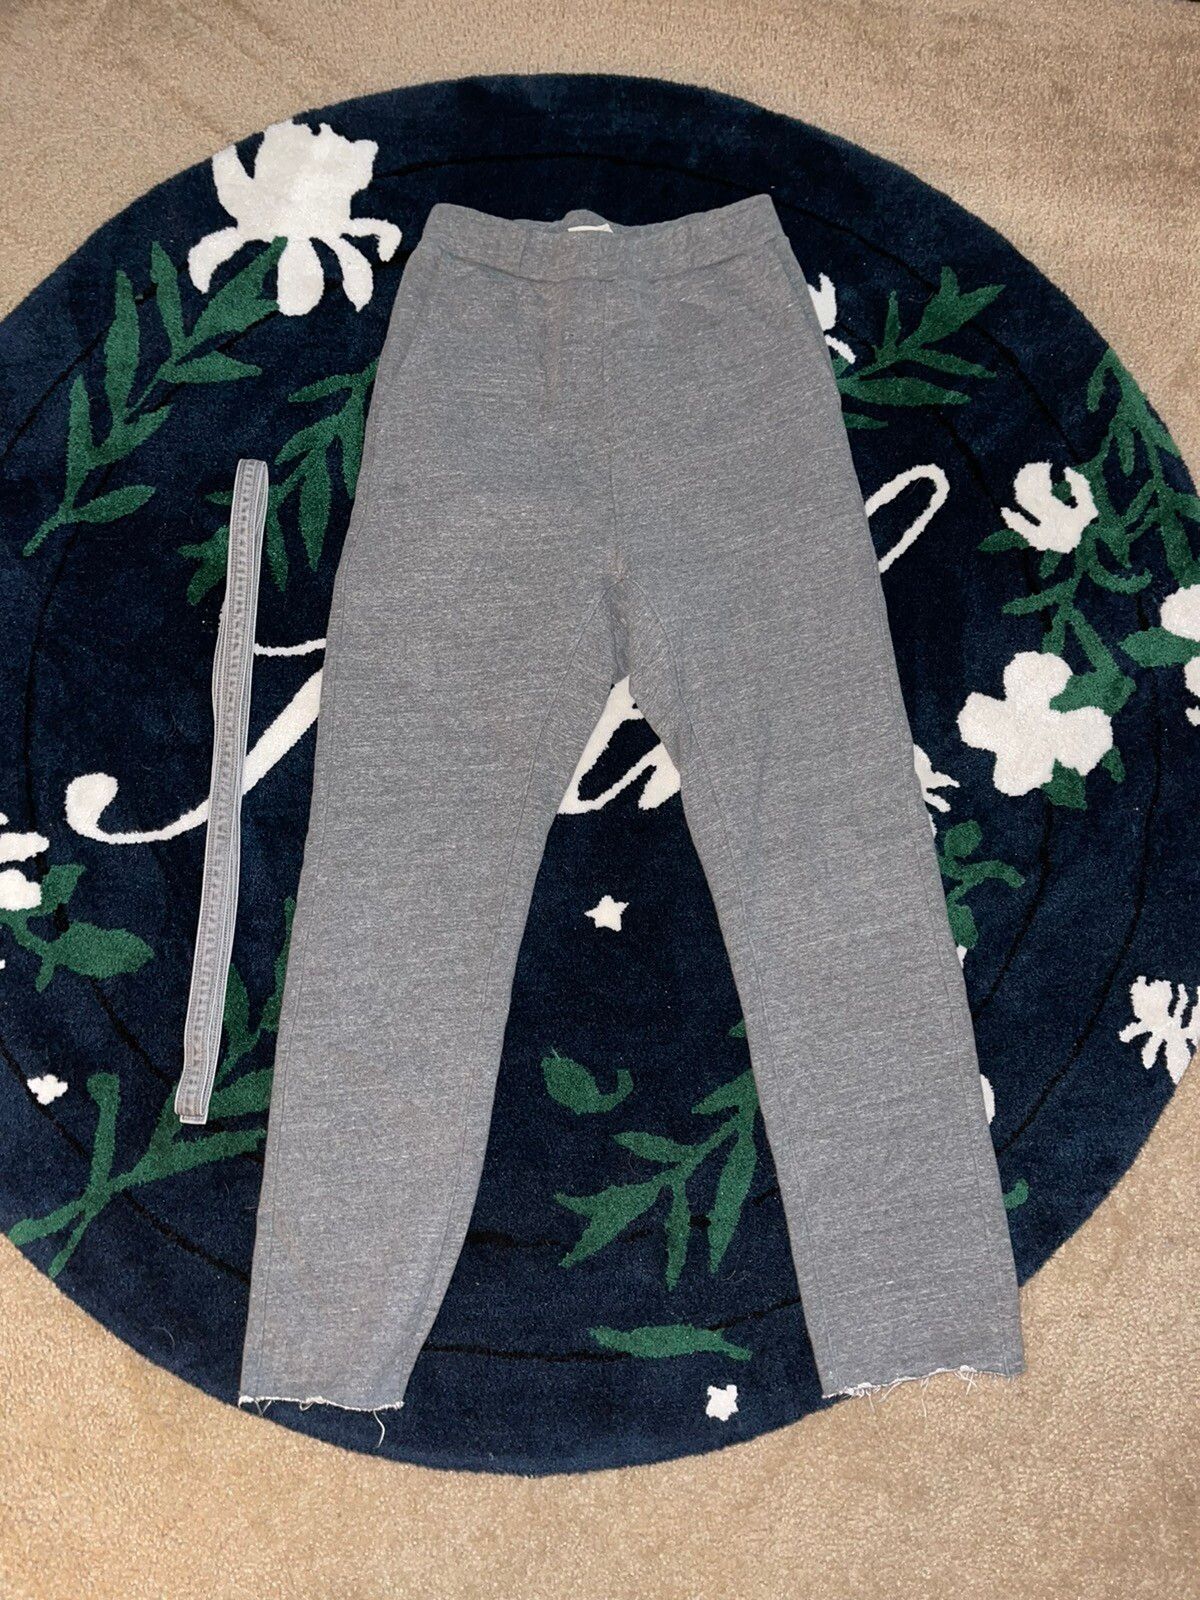 Nordstrom Fear of God Sixth Collection Core Mainline Gray Sweatpants |  Grailed